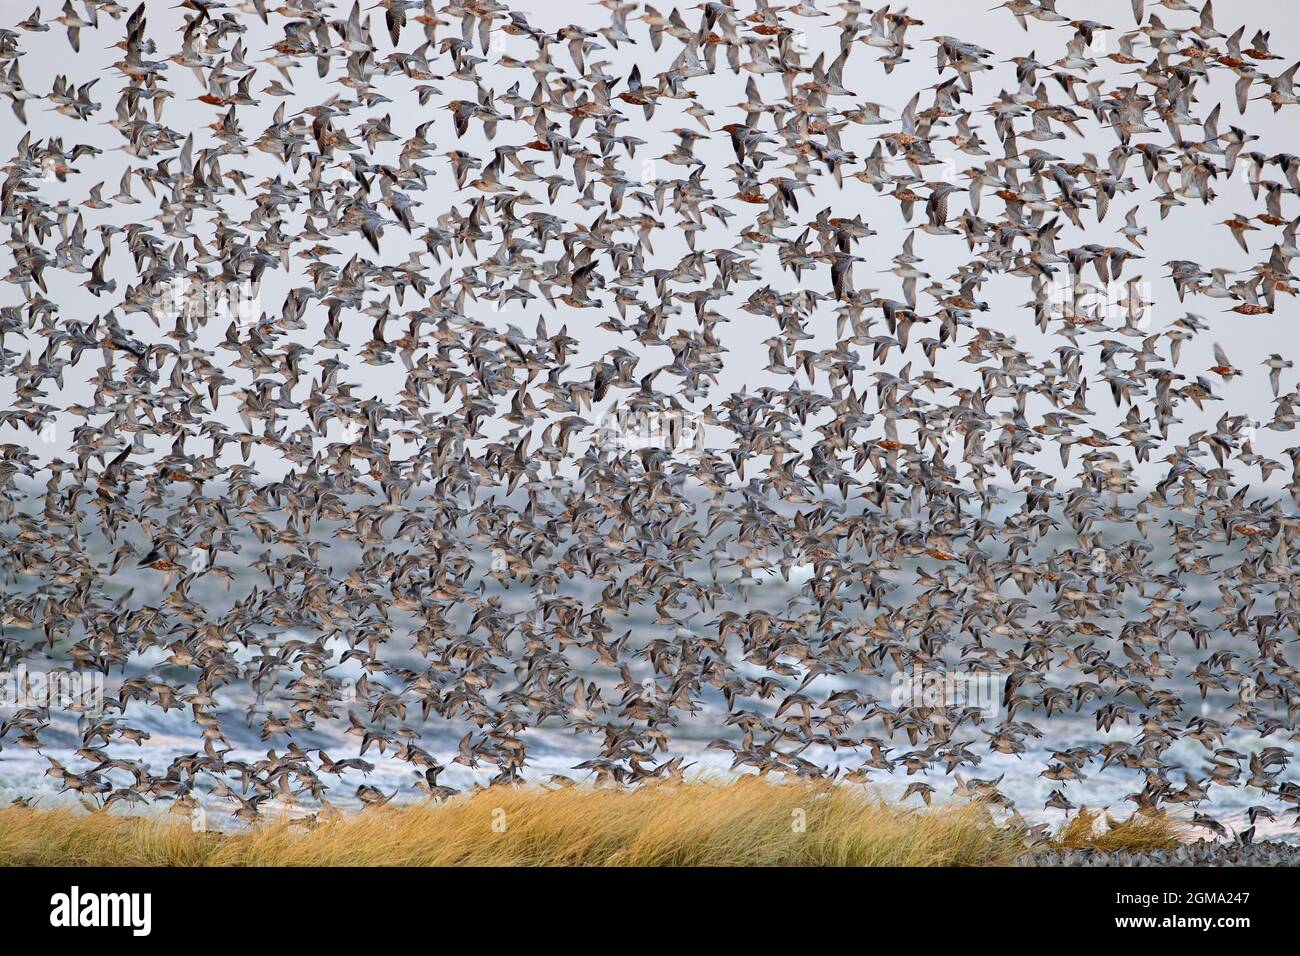 Red knot (Calidris canutus) flock of knots in non-breeding plumage landing on beach along the Schleswig-Holstein Wadden Sea National Park, Germany Stock Photo